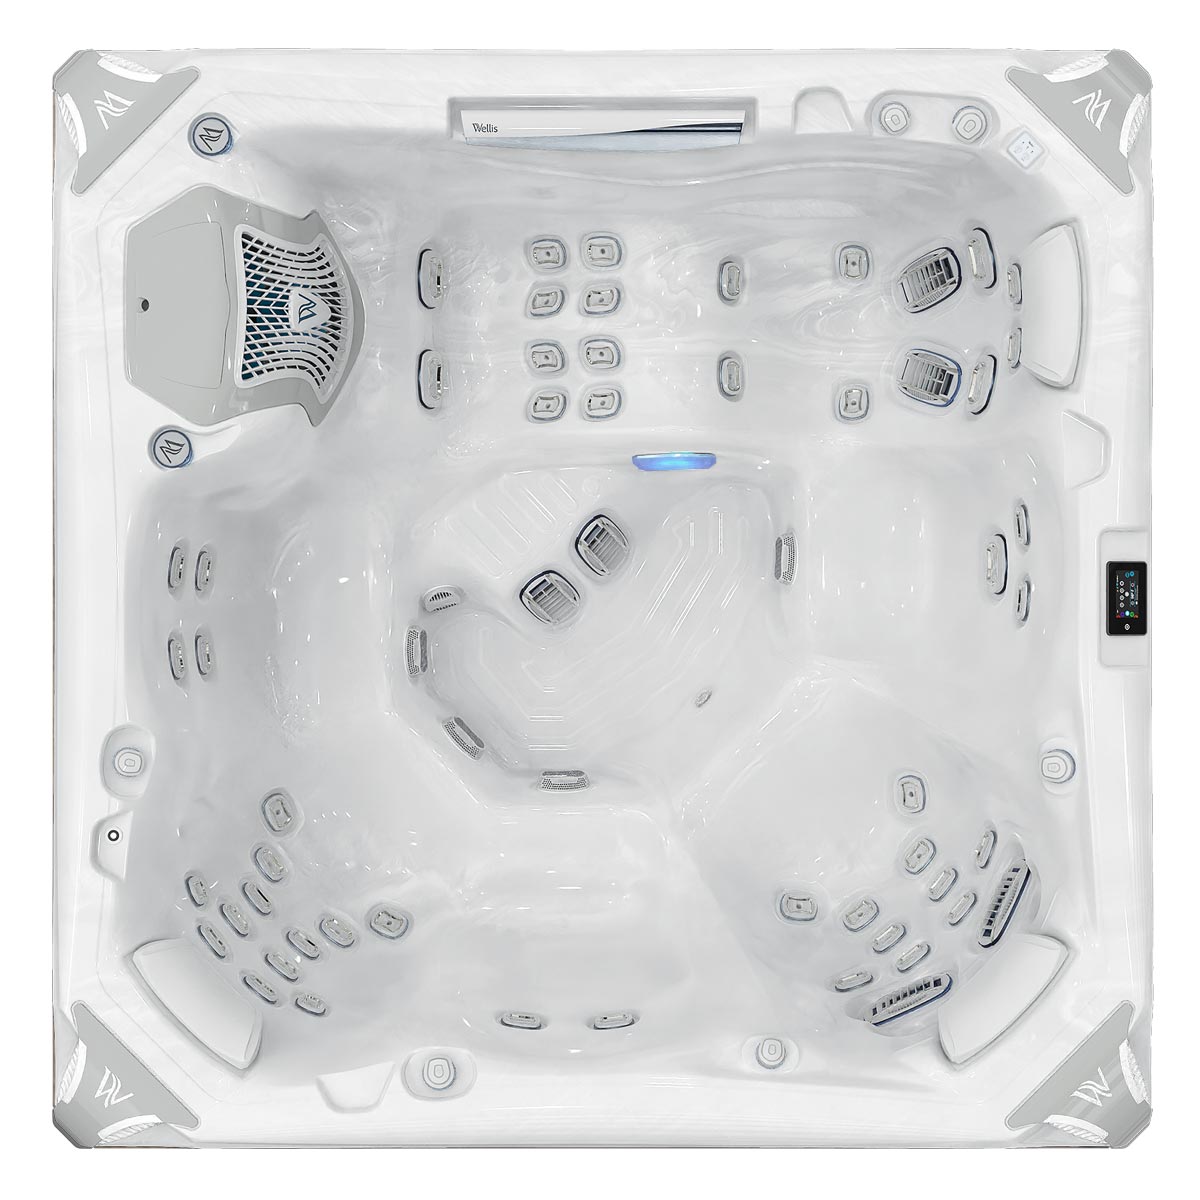 Kilimanjaro Life hottub sterling silver deluxe edition top view